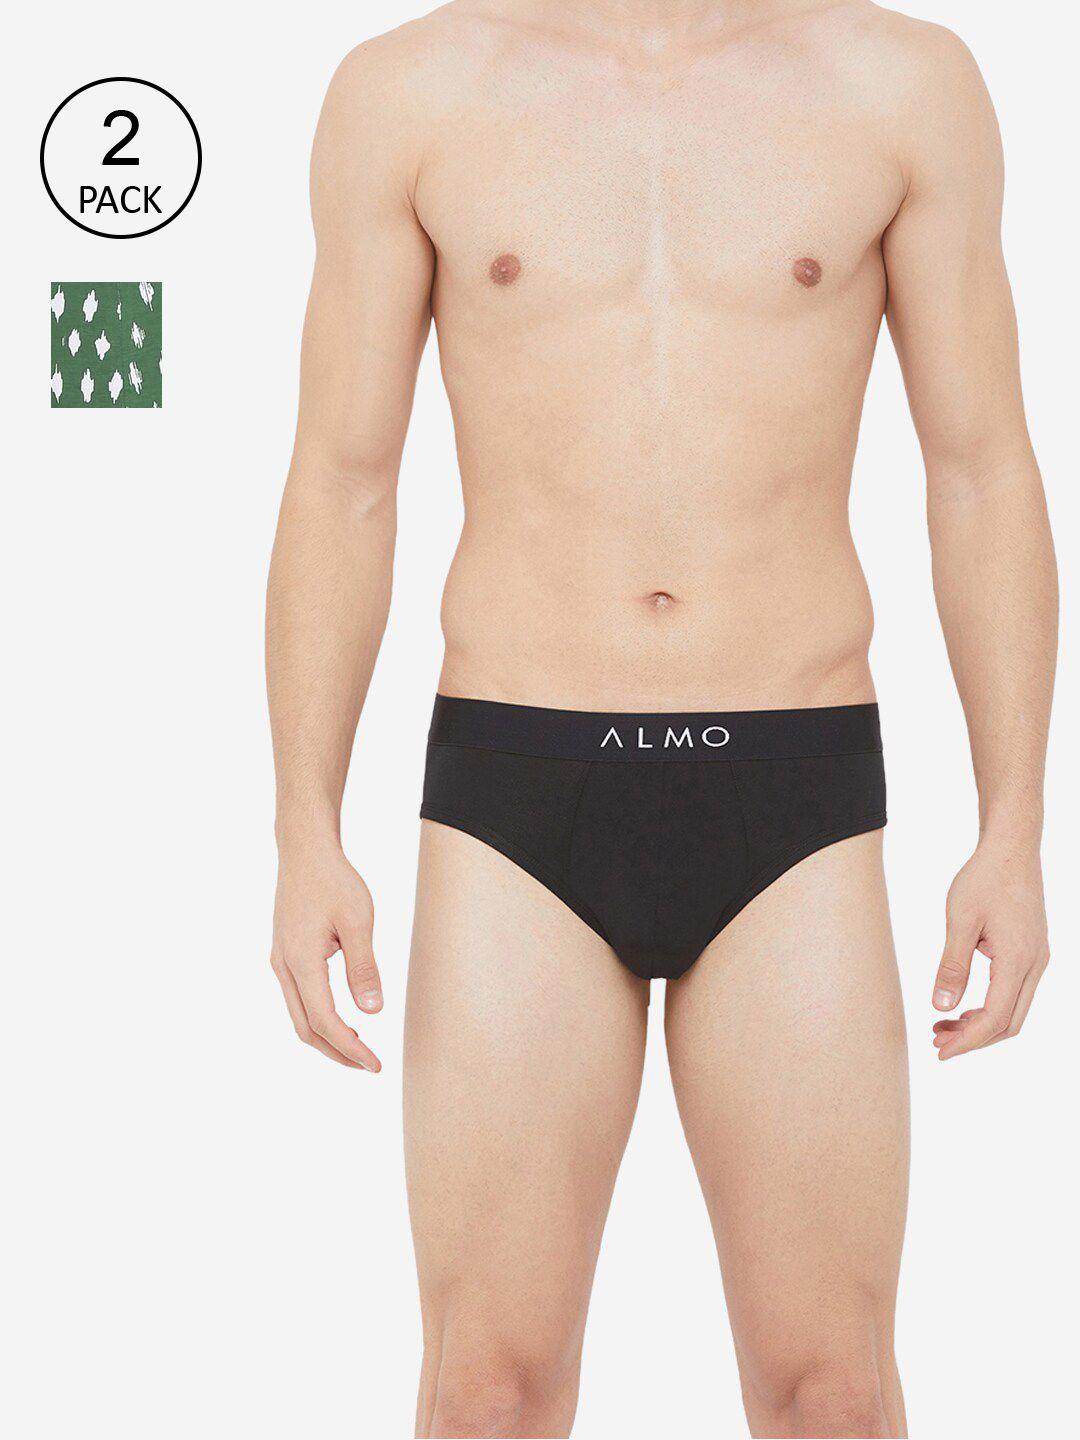 almo wear men pack of 2 assorted organic cotton slim-fit basic briefs